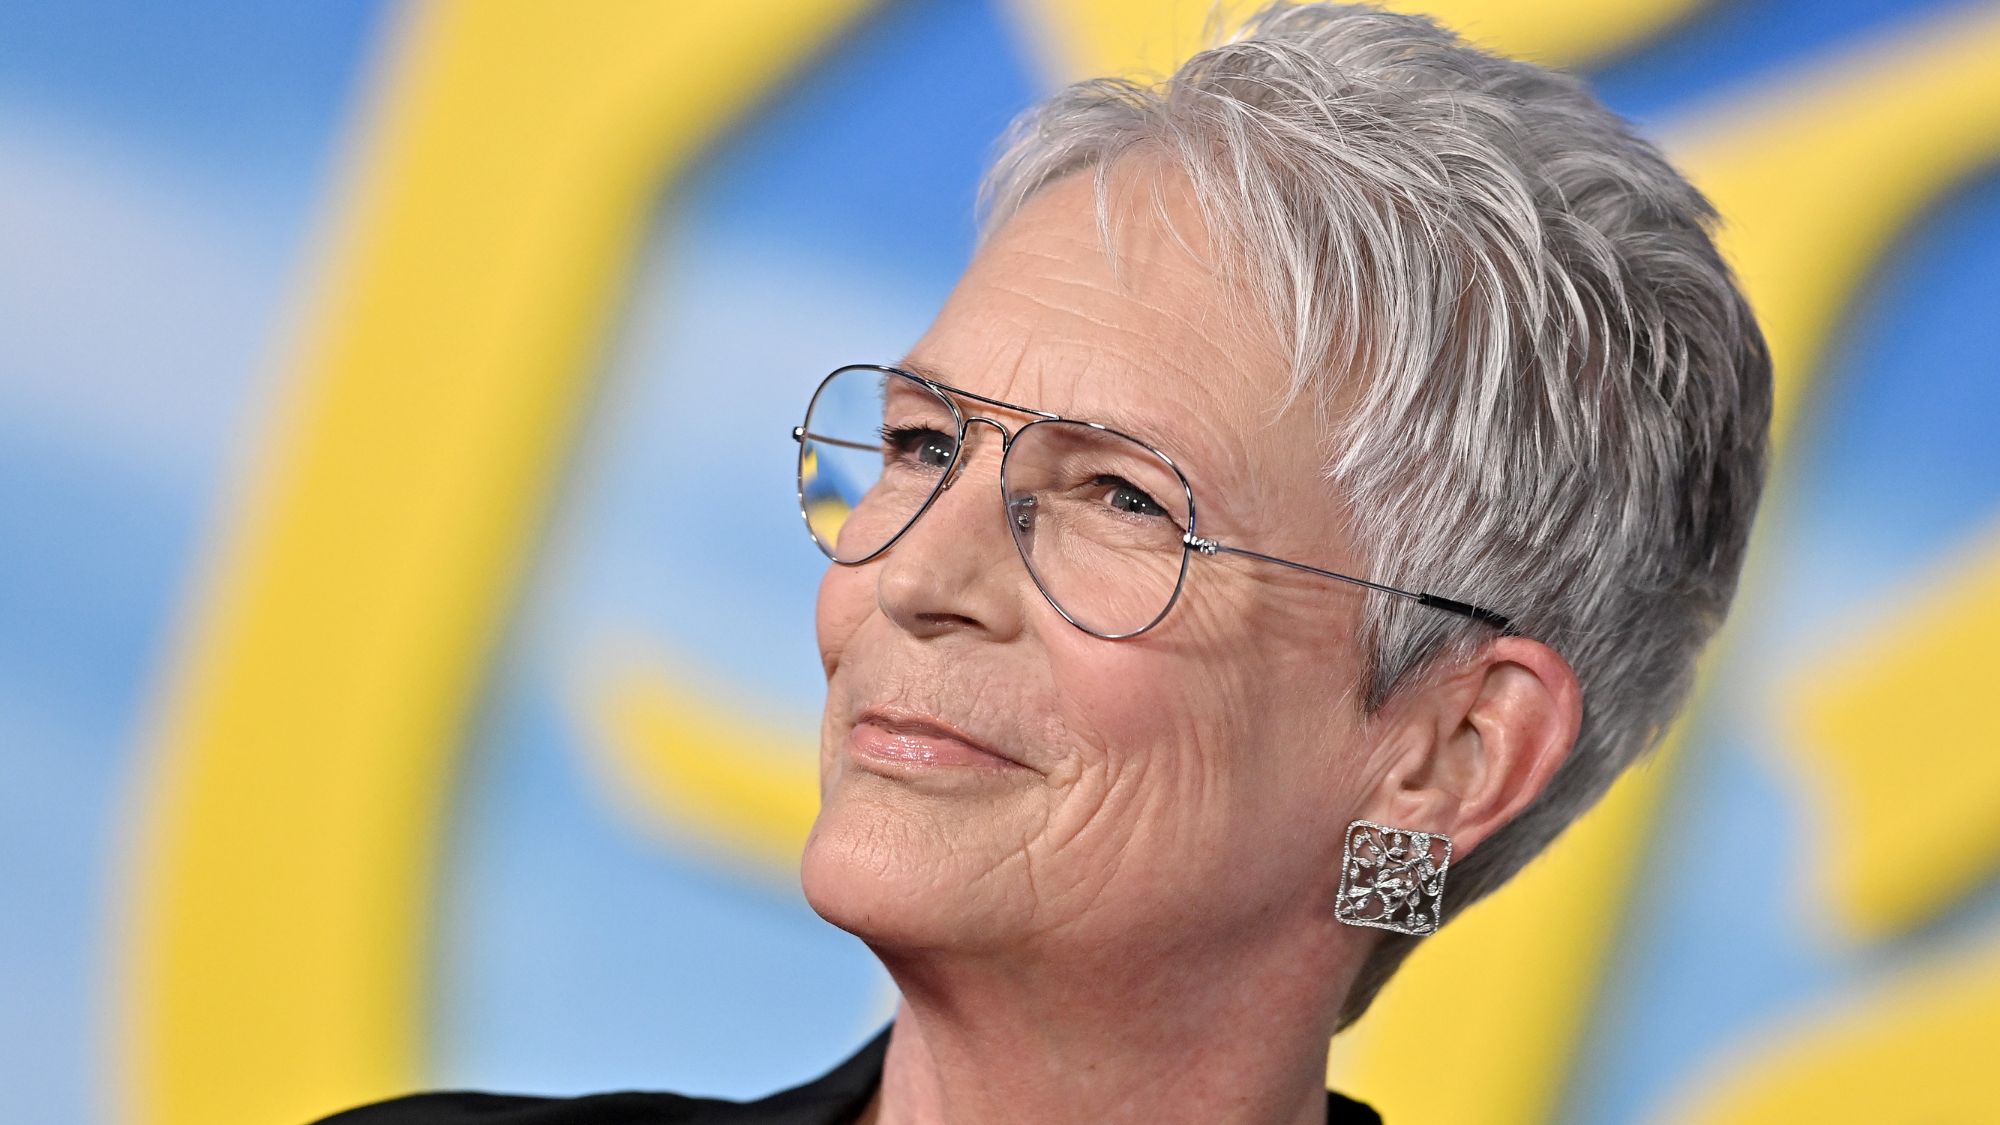 35 Flattering Short Hairstyles for Women Over 60 with Glasses